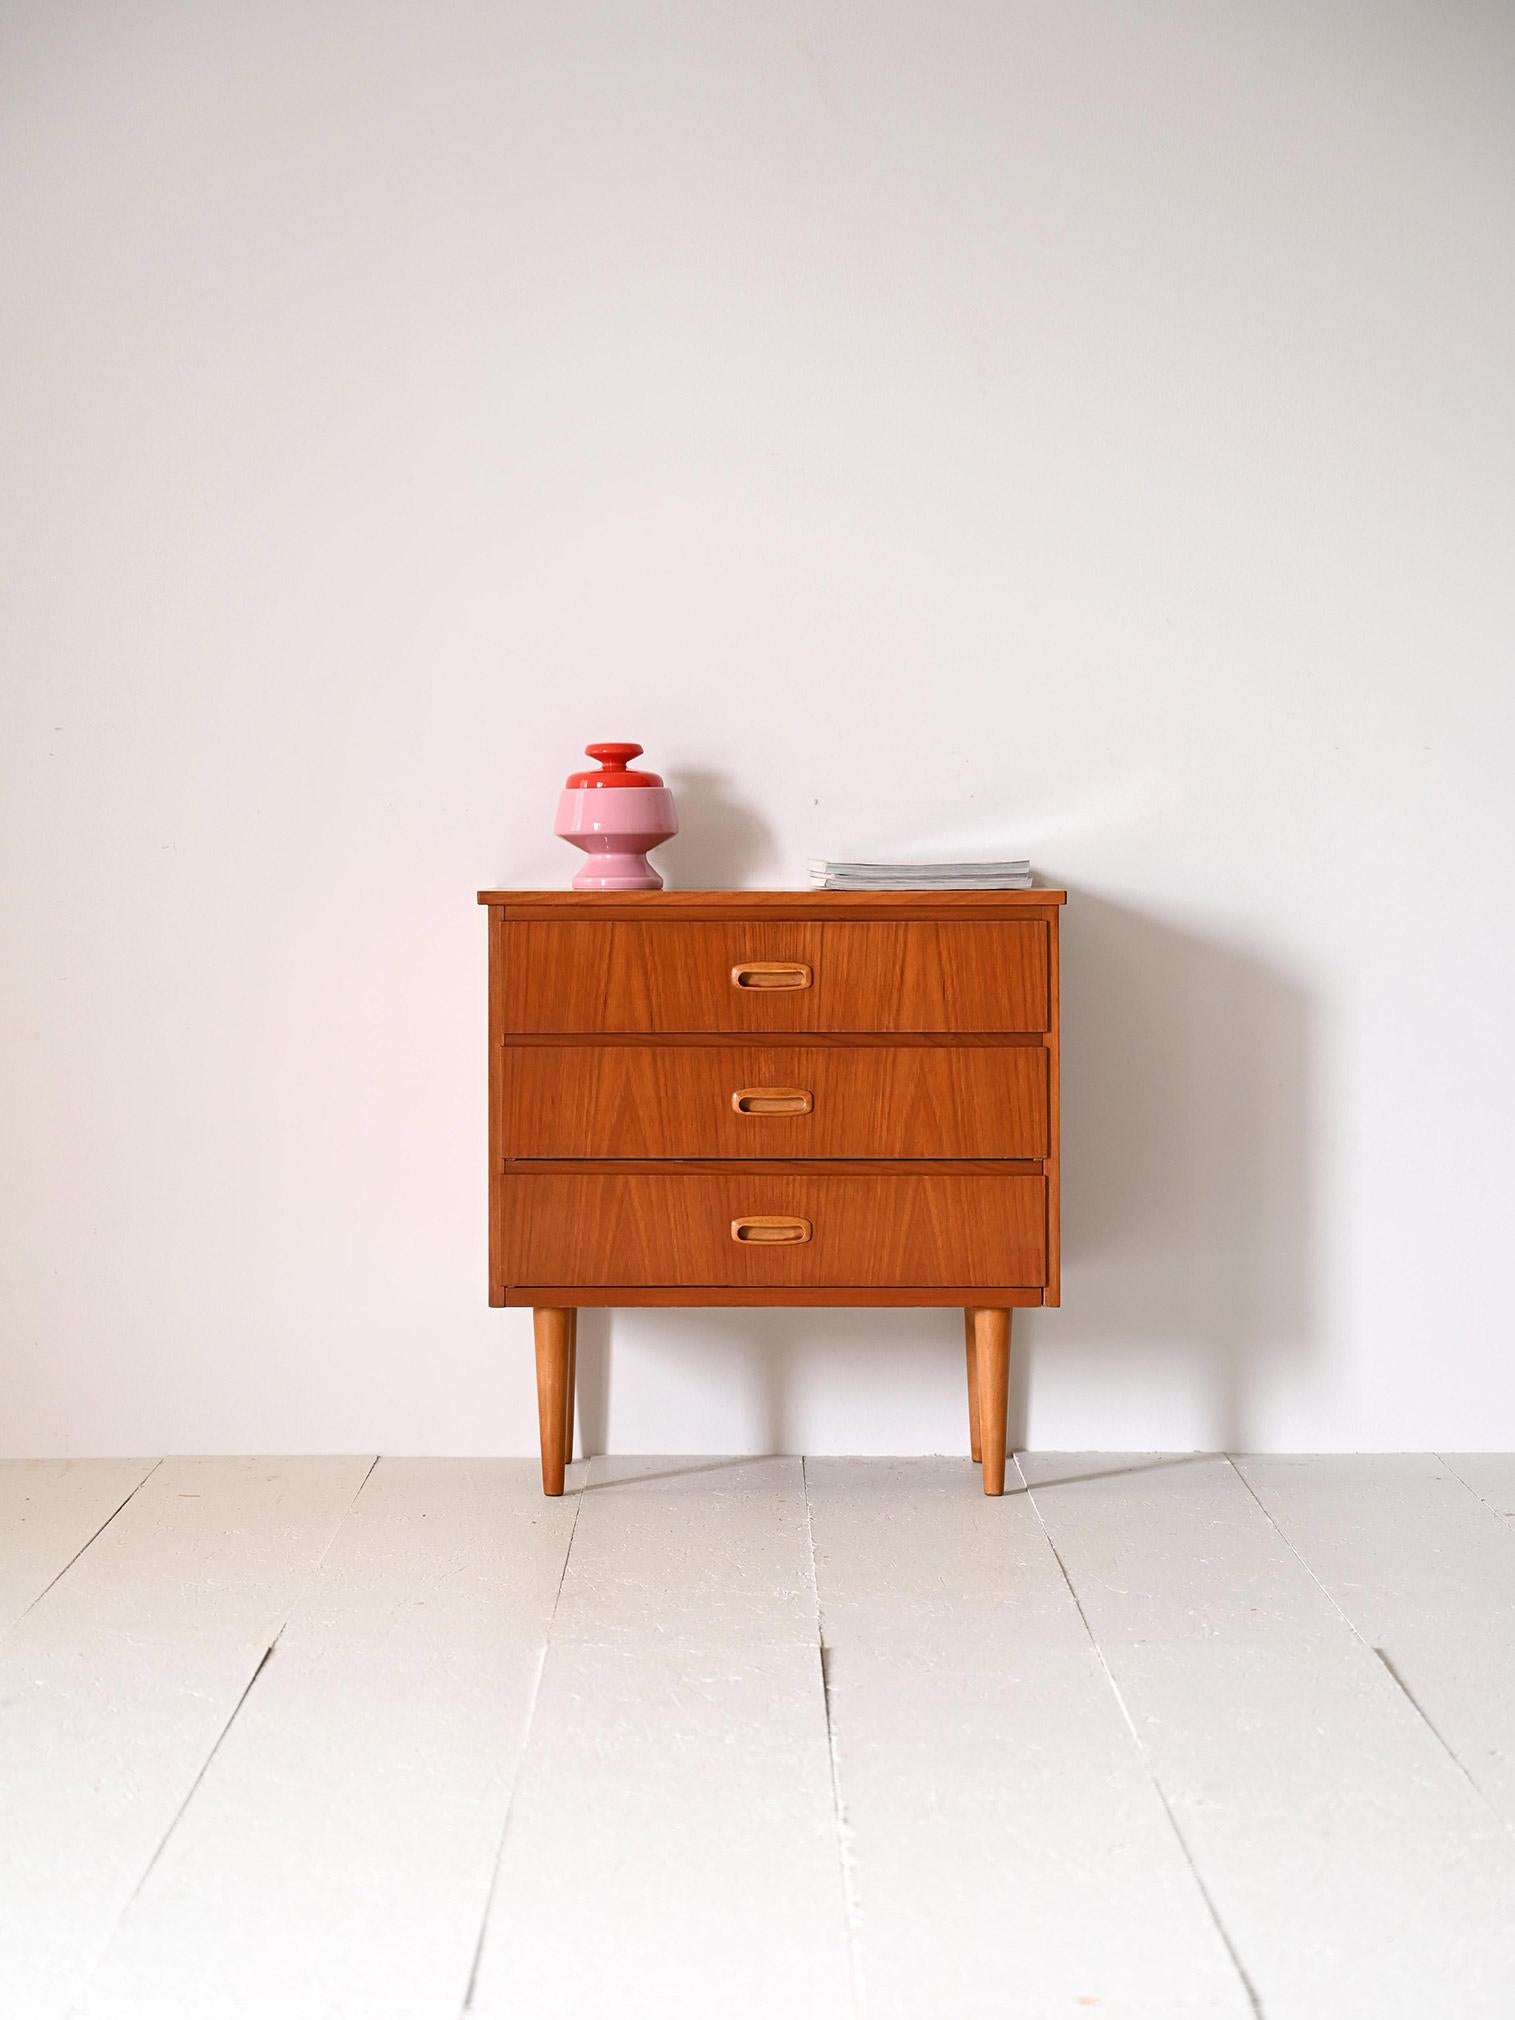 Scandinavian vintage cabinet with three drawers.

This piece of modern antique furniture is characterized by the essential lines and careful details typical of Nordic design. It consists of a teak frame with 3 drawers with carved wooden handles. The